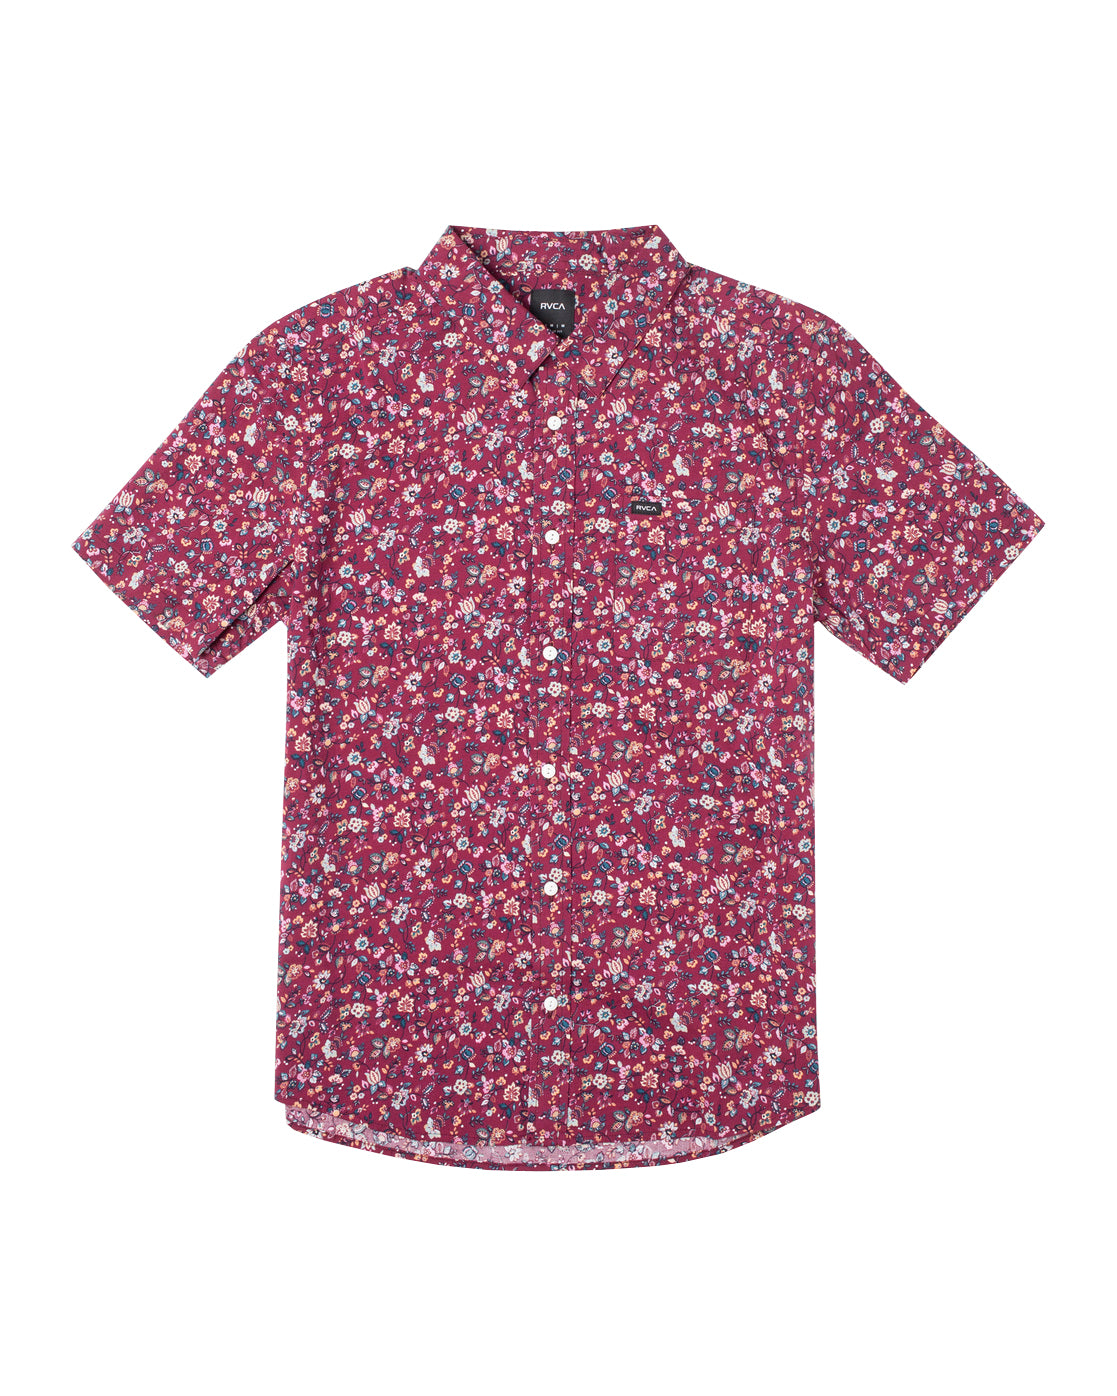 RVCA Justice Floral SS Woven Tee OXR S